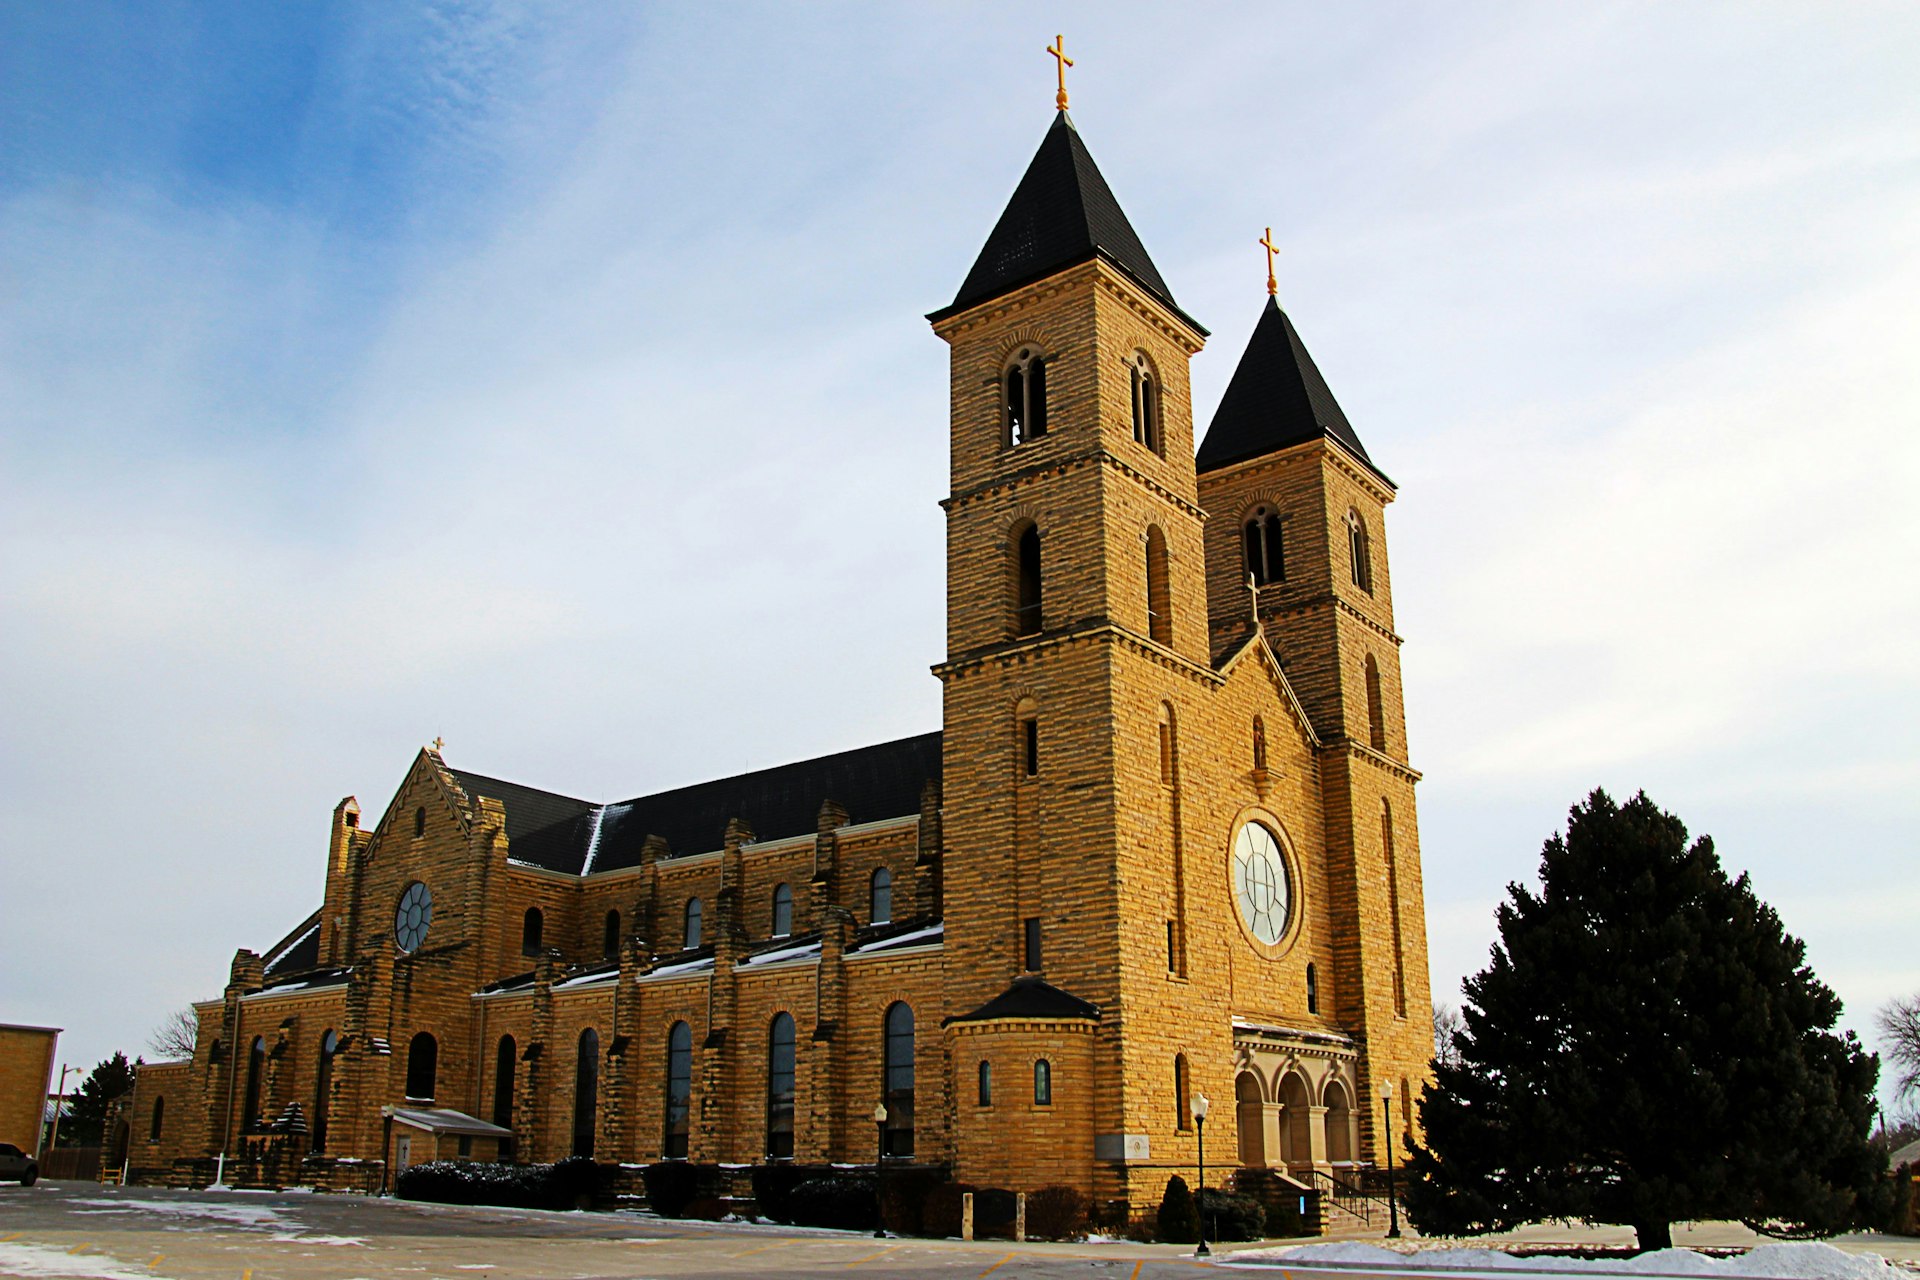 St Fidelis Church in Victoria, Kansas, also known as the Cathedral of the Plains